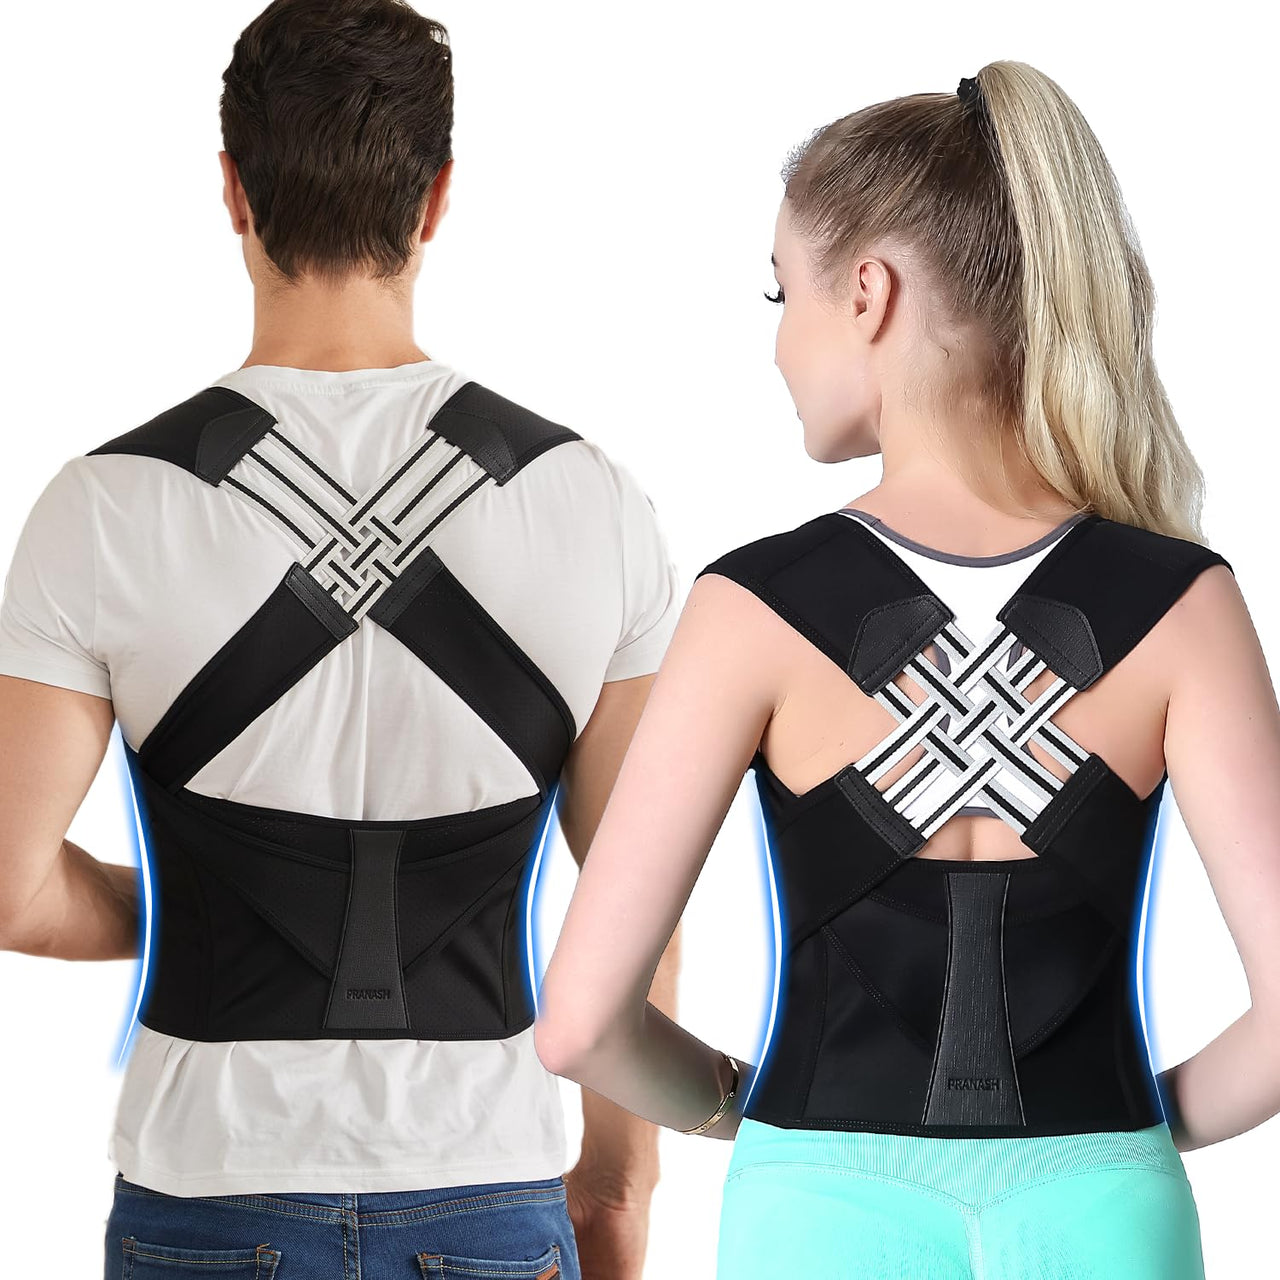 3 Best Posture Corrector South Africa: Improve Your Posture and Relieve Back  Pain